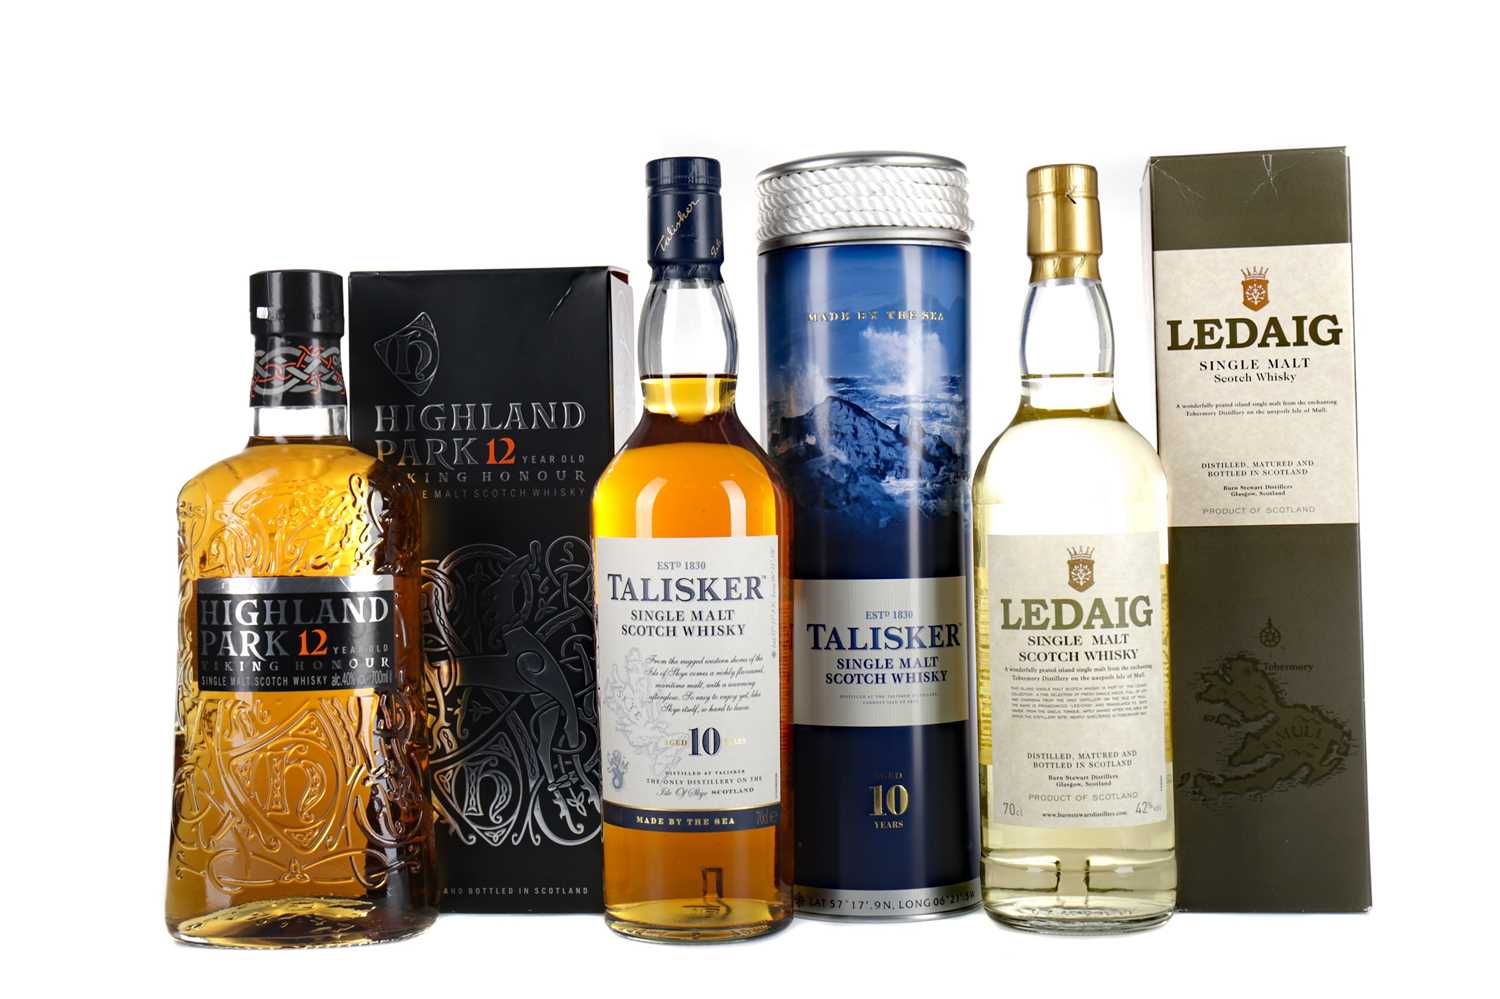 Lot 21 - HIGHLAND PARK 12 YEARS OLD, TALISKER AGED 10 YEARS AND LEDAIG